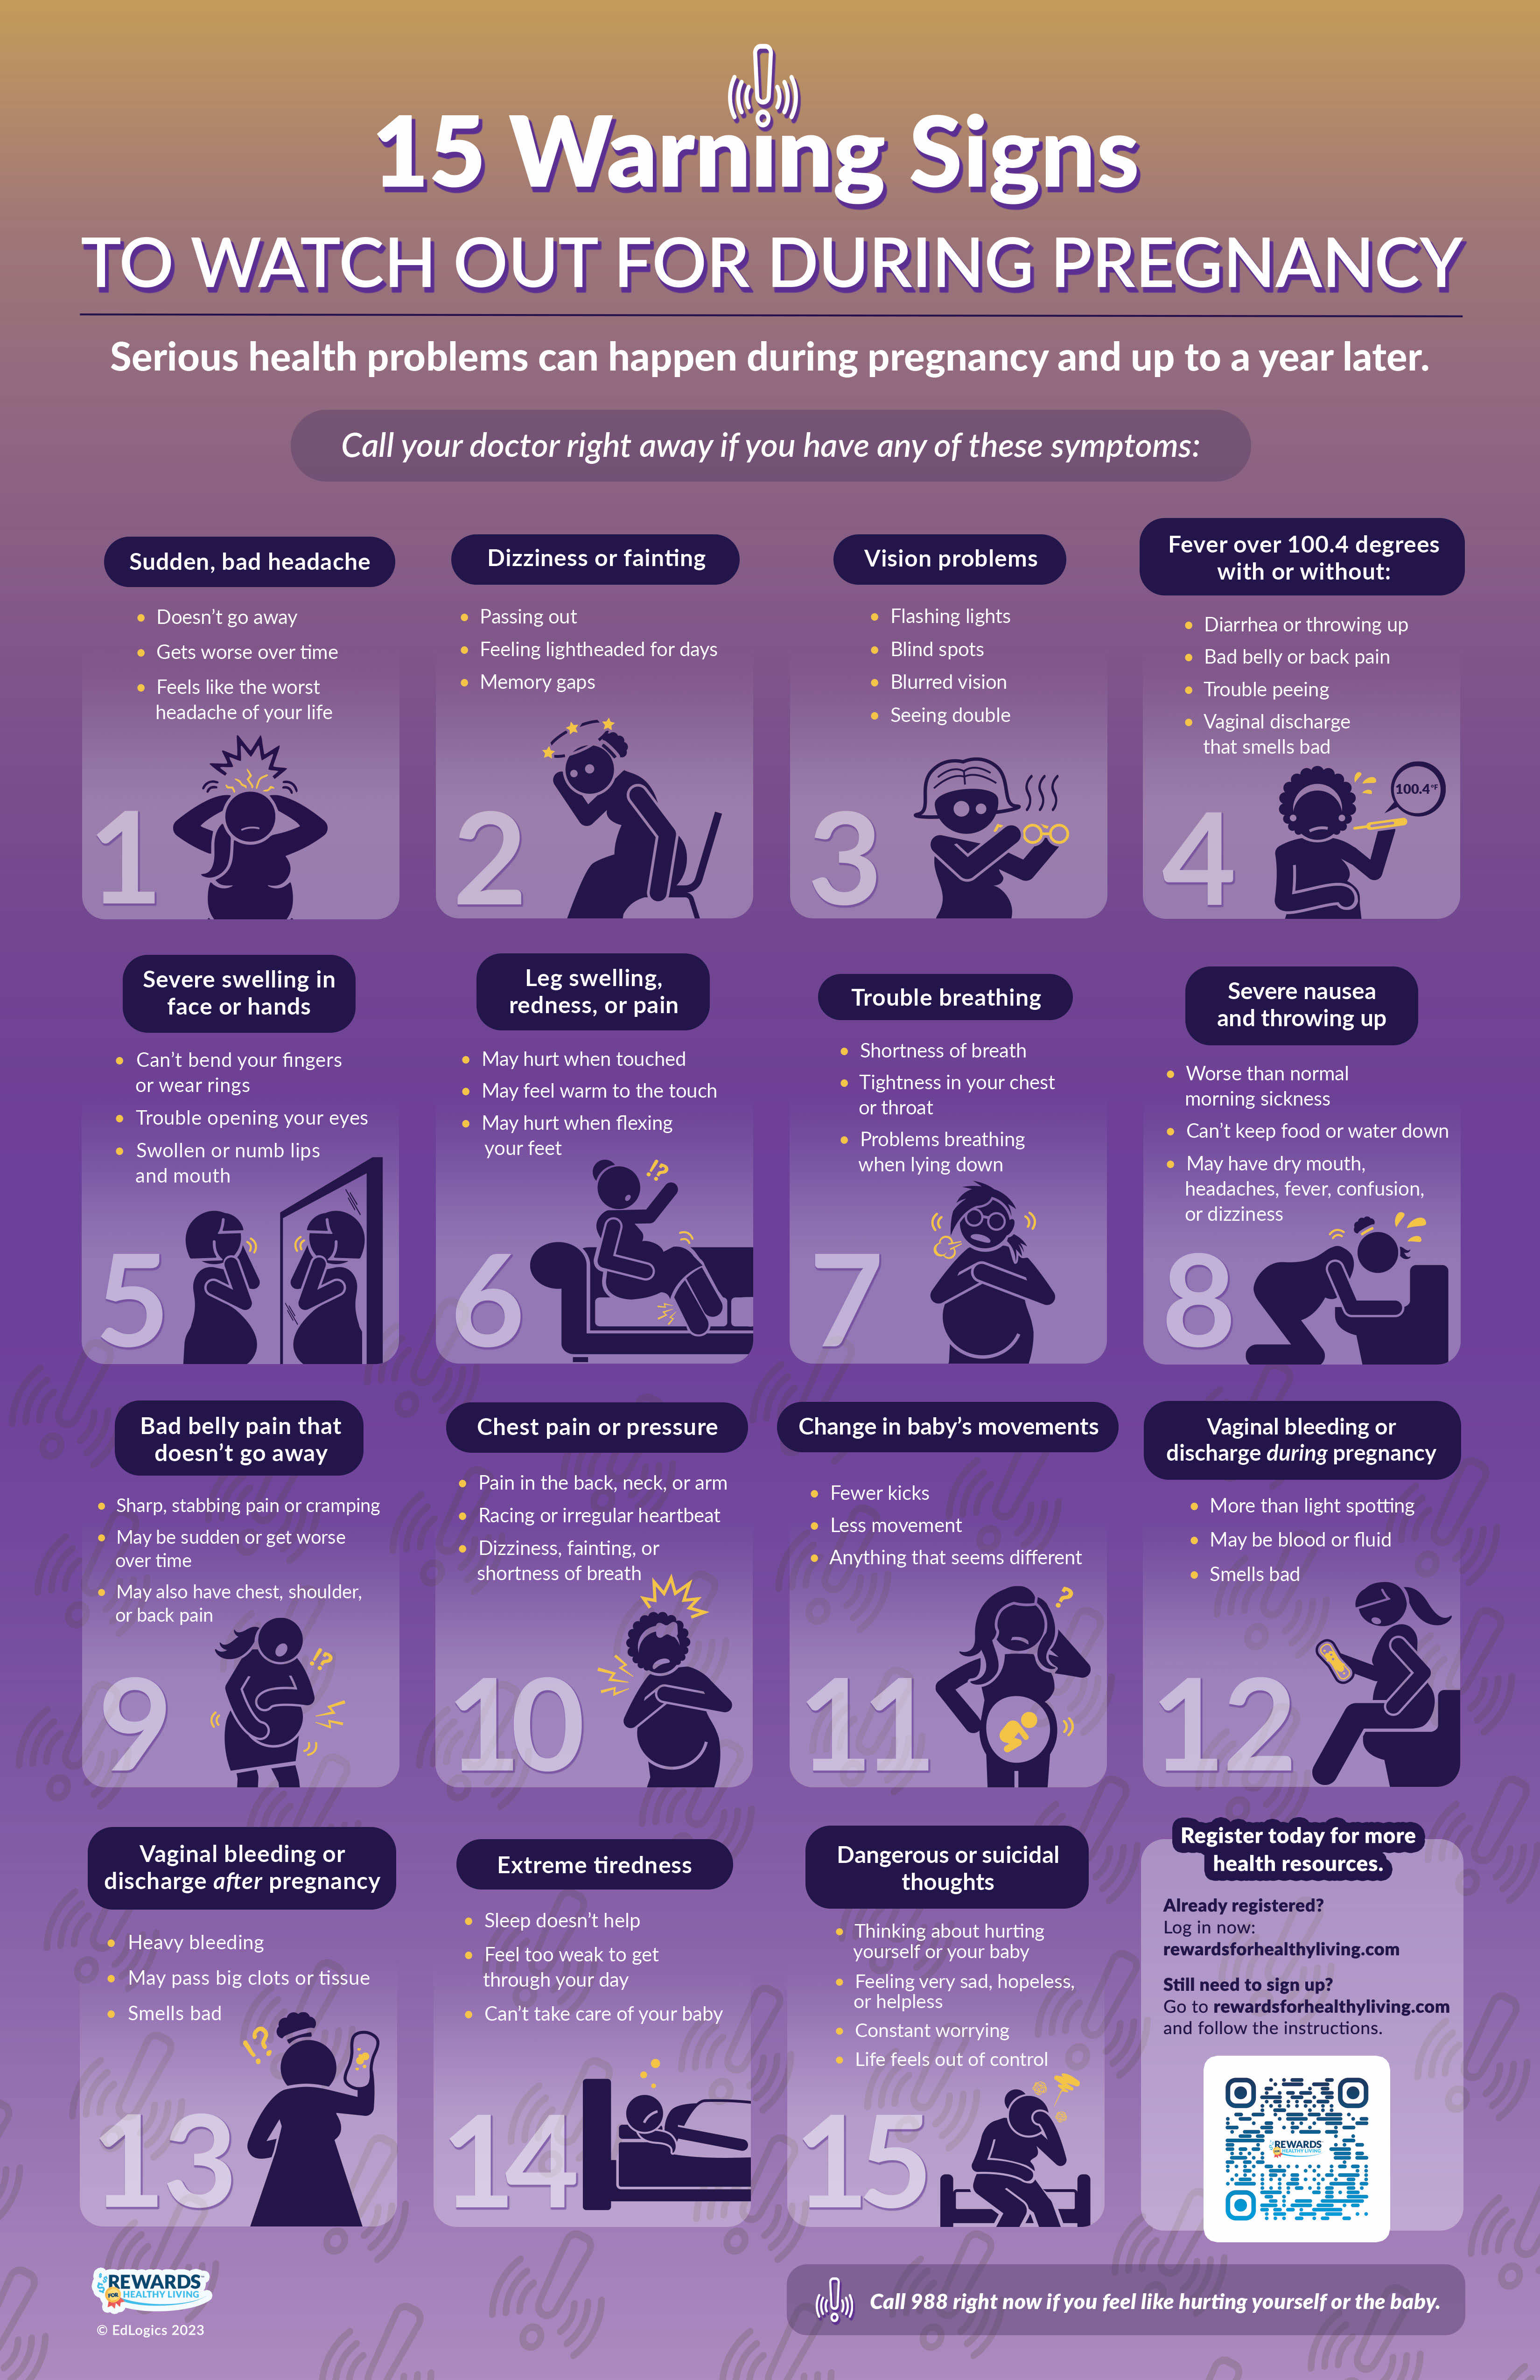 15 Warning Signs to Watch Out for During Pregnancy Infographic